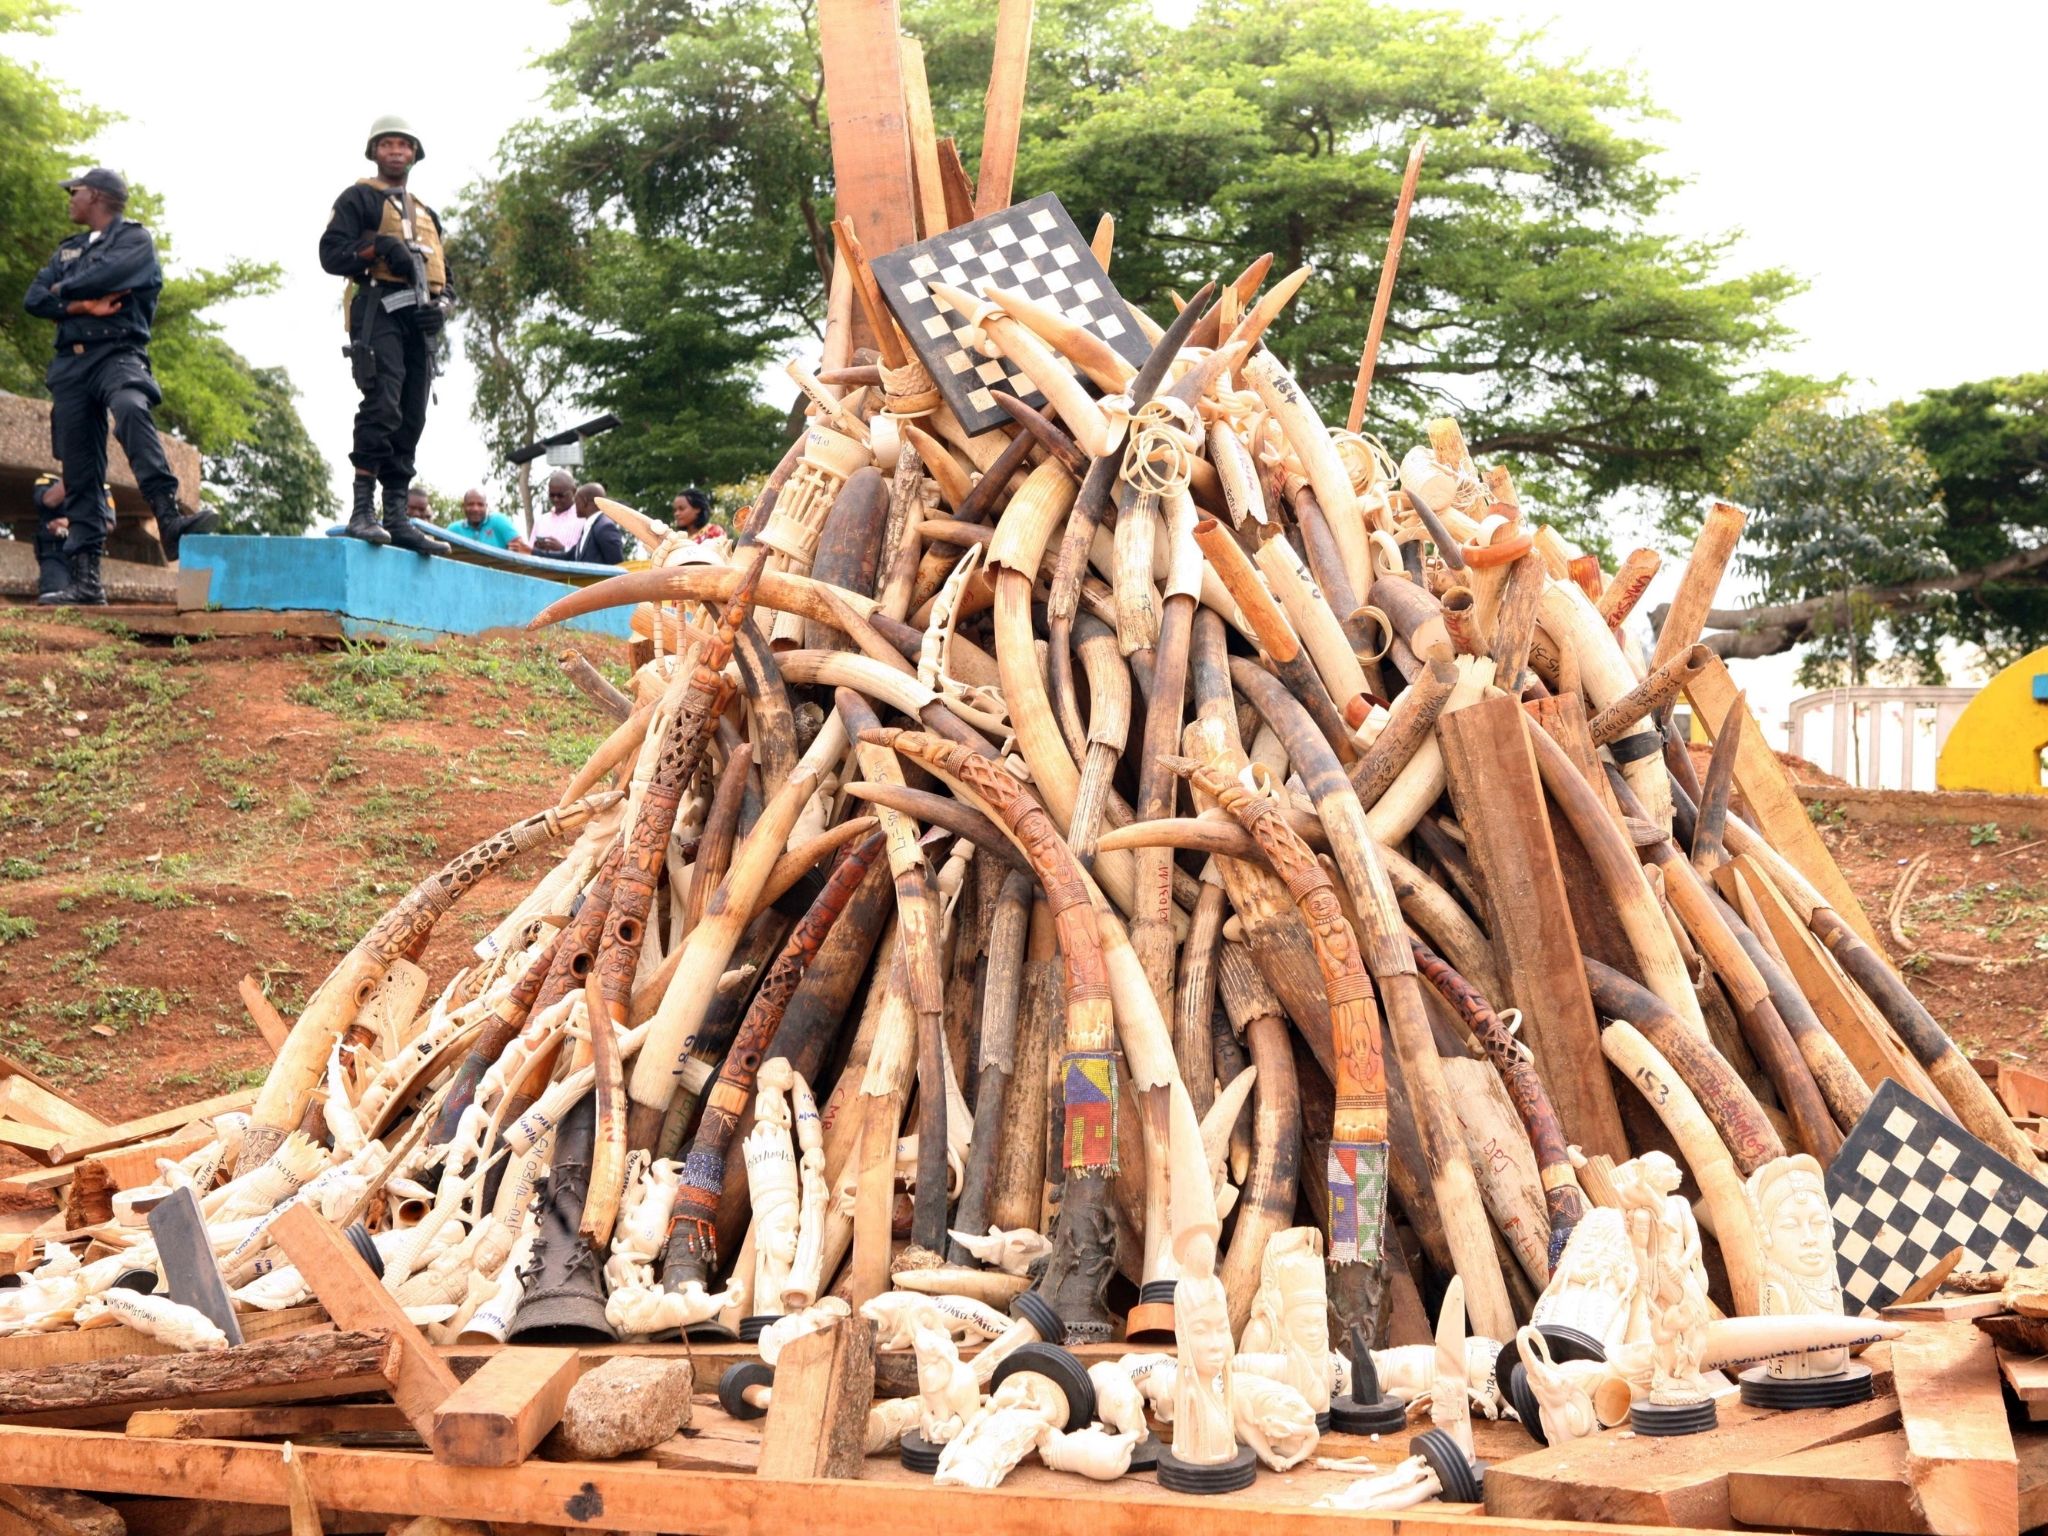 Soldiers in Yaounde stand near a pile of ivory seized from poachers by the Cameroonian Service for the Protection of Wildlife and Forests